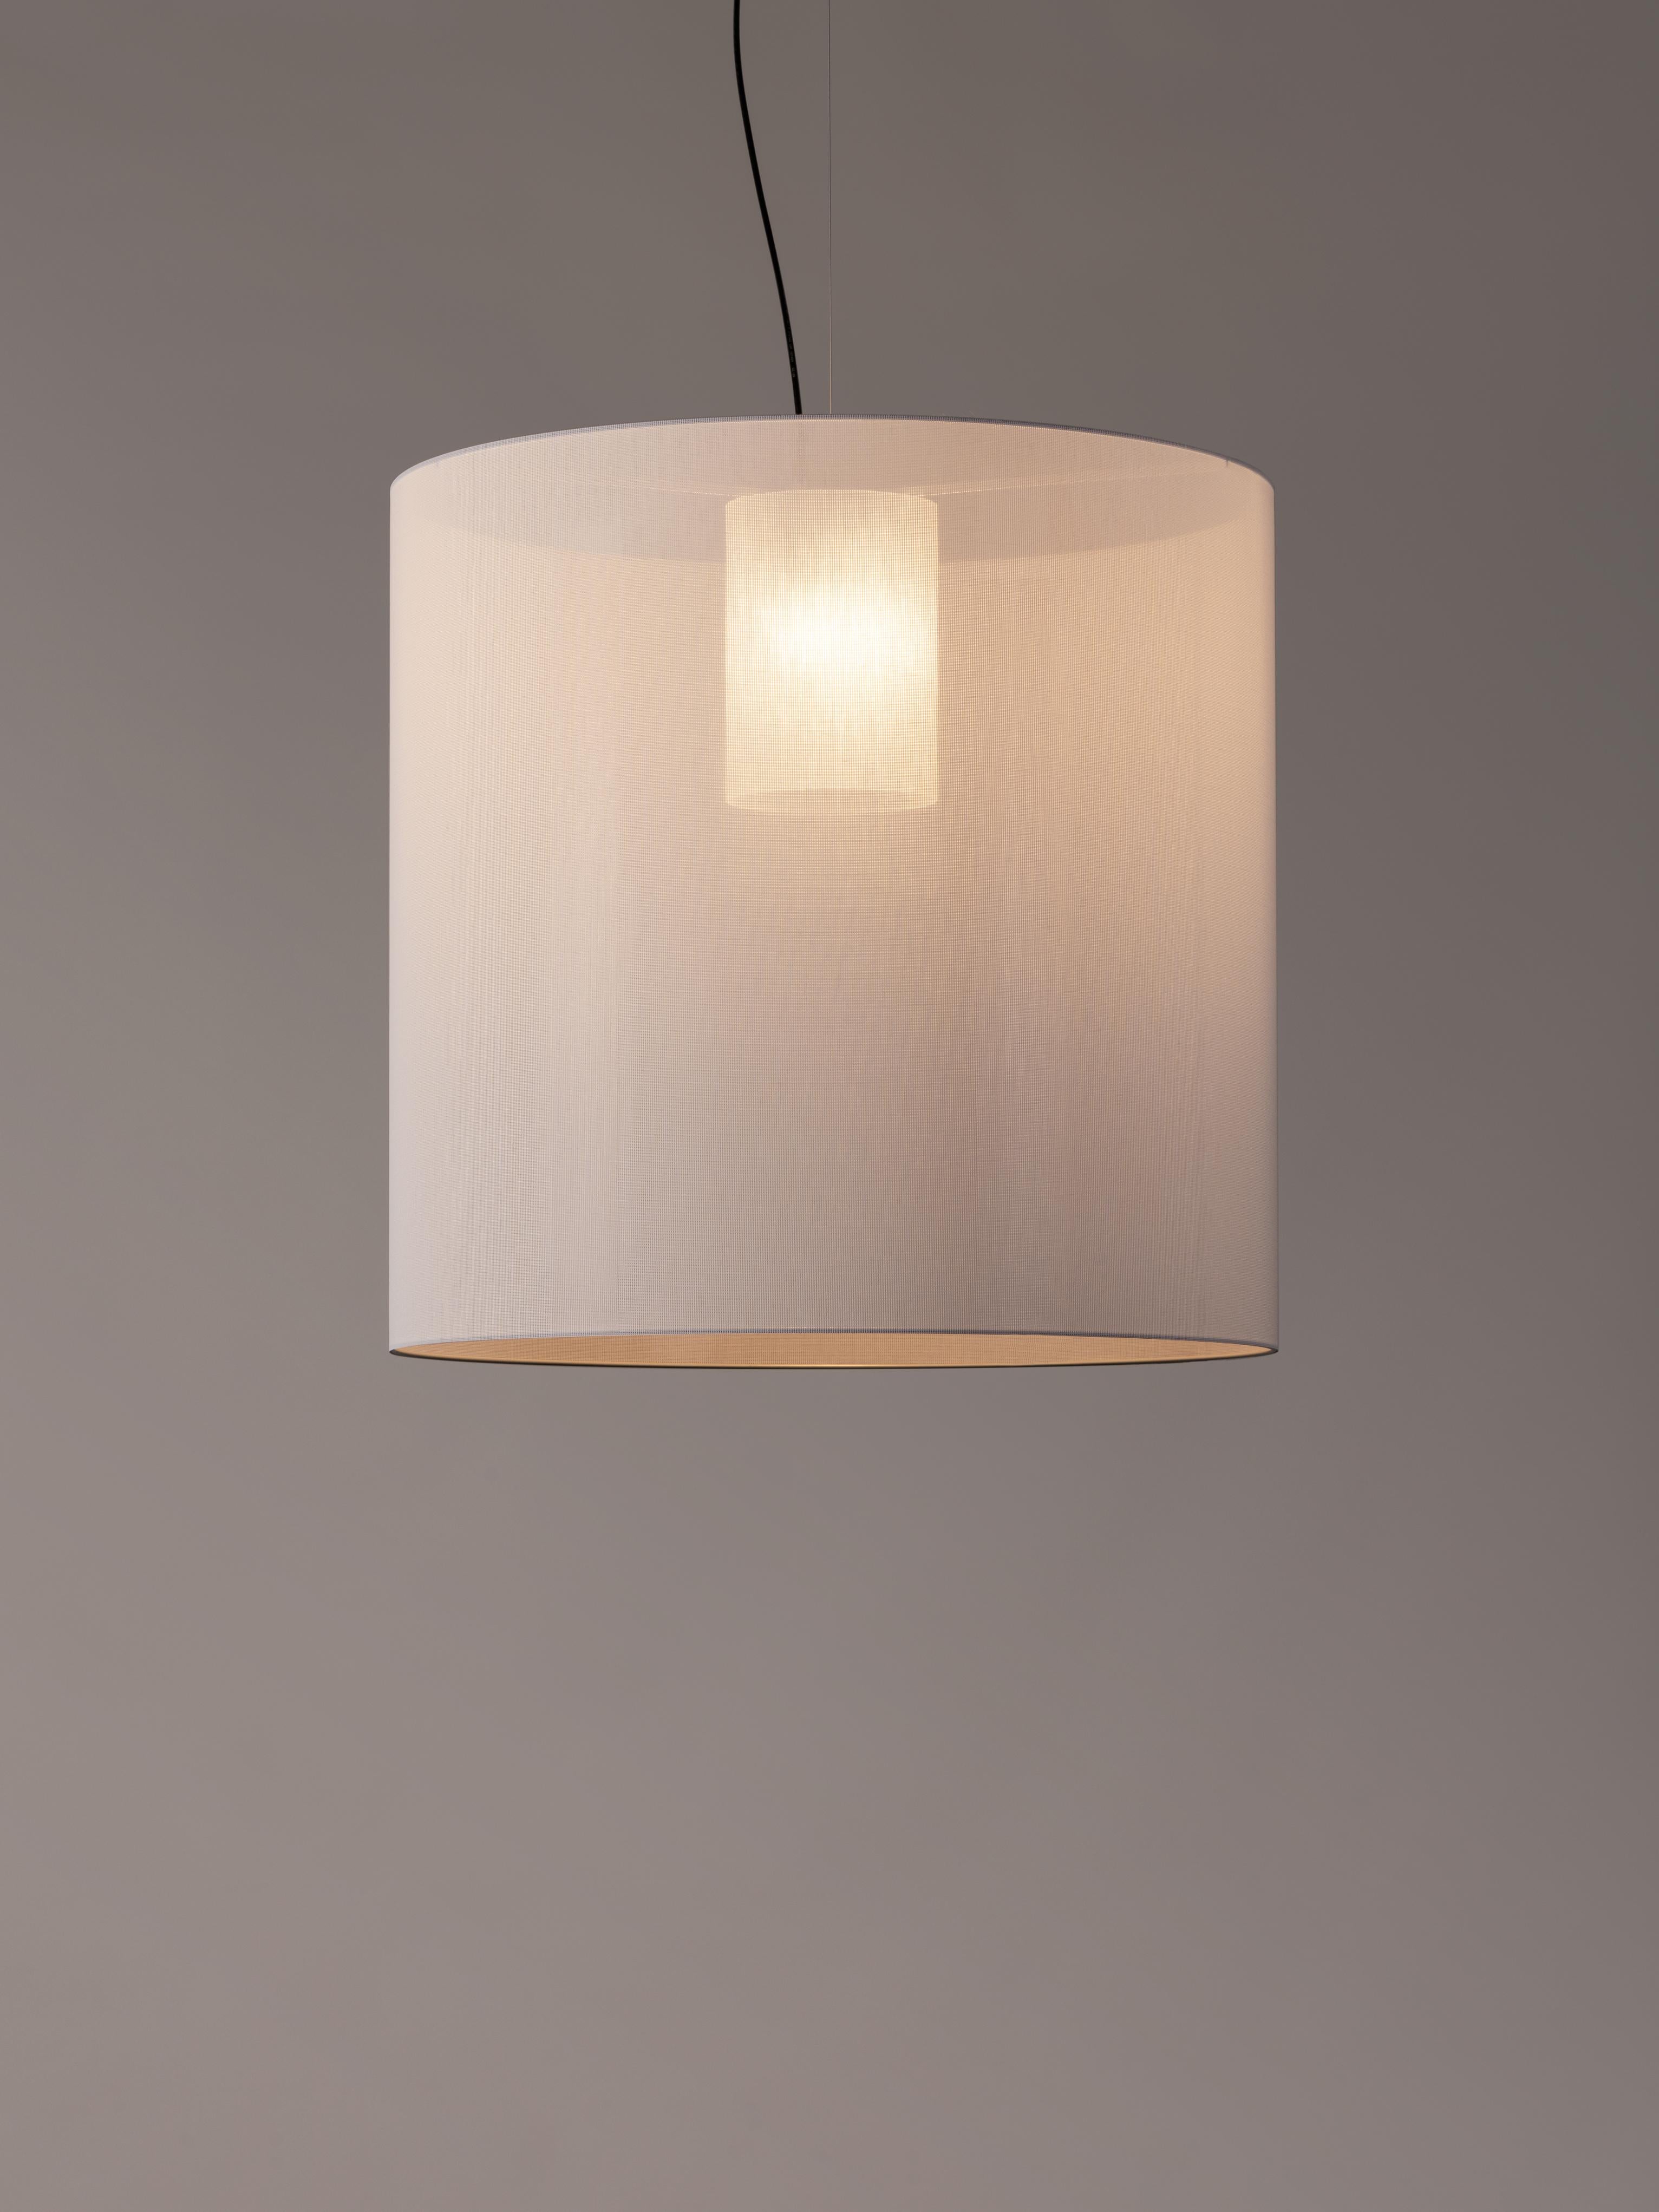 White Moaré X pendant lamp by Antoni Arola
Dimensions: D 83 x H 81 cm
Materials: Metal, polyester.
Available in other colors and sizes.

Moaré’s multiple combinations of formats and colours make it highly versatile. The series takes its name